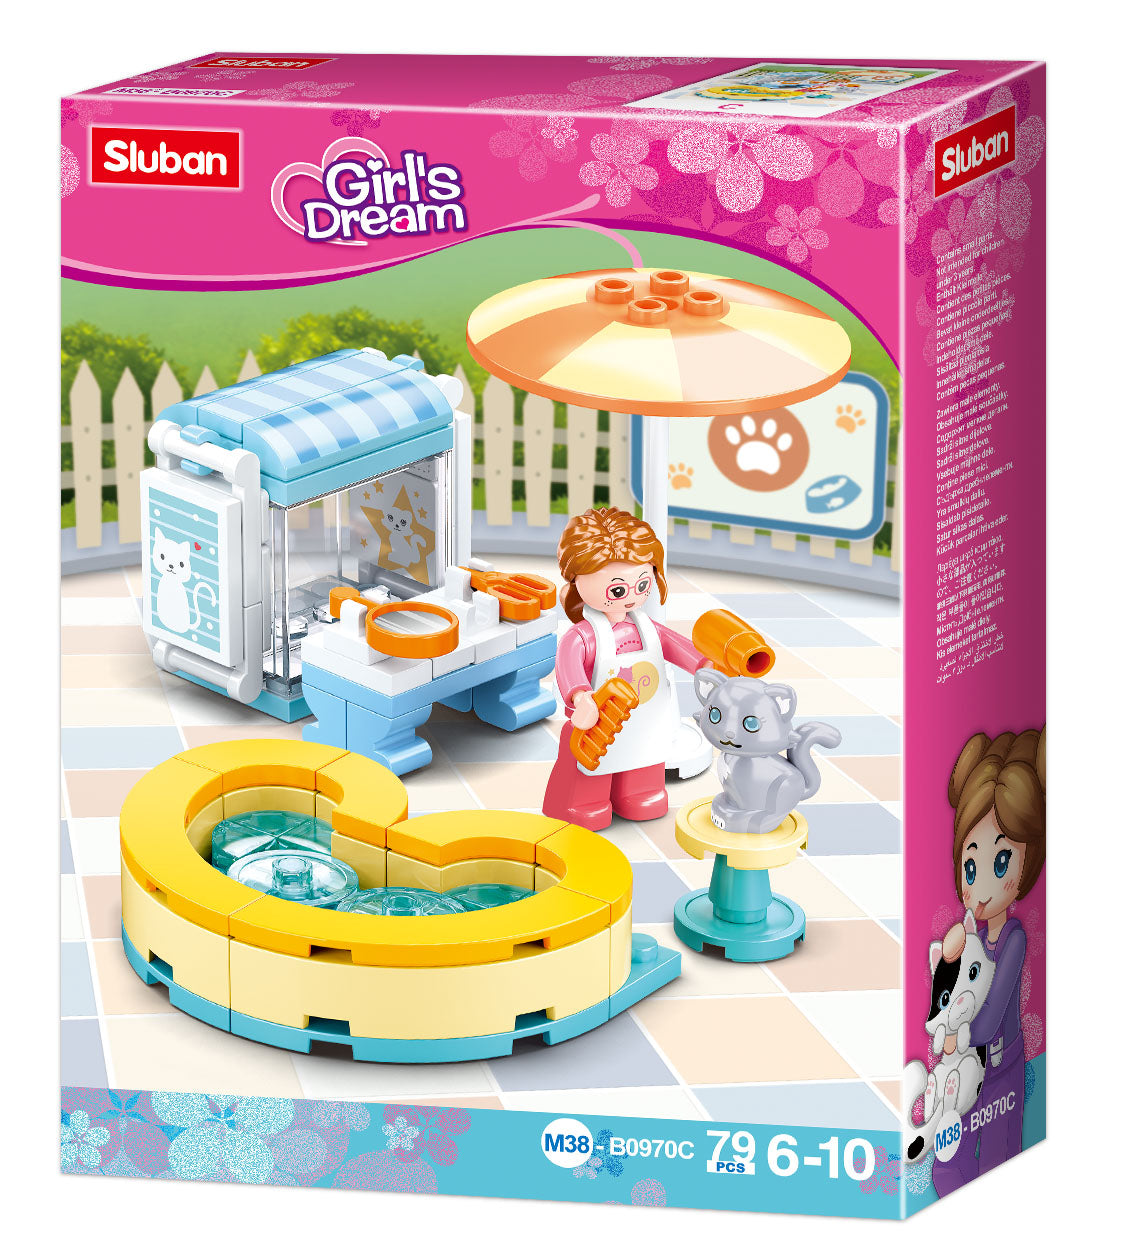 SLUBAN® Cat Spa (M38-B970C) (79 Pieces) Building Blocks Kit For Girls Aged 6 Years And Above Creative  Construction Set Educational STEM Toy, Ideal For Gifting Birthday Gift Return Gift, Blocks Compatible With Other Leading Brands, BIS Certified.